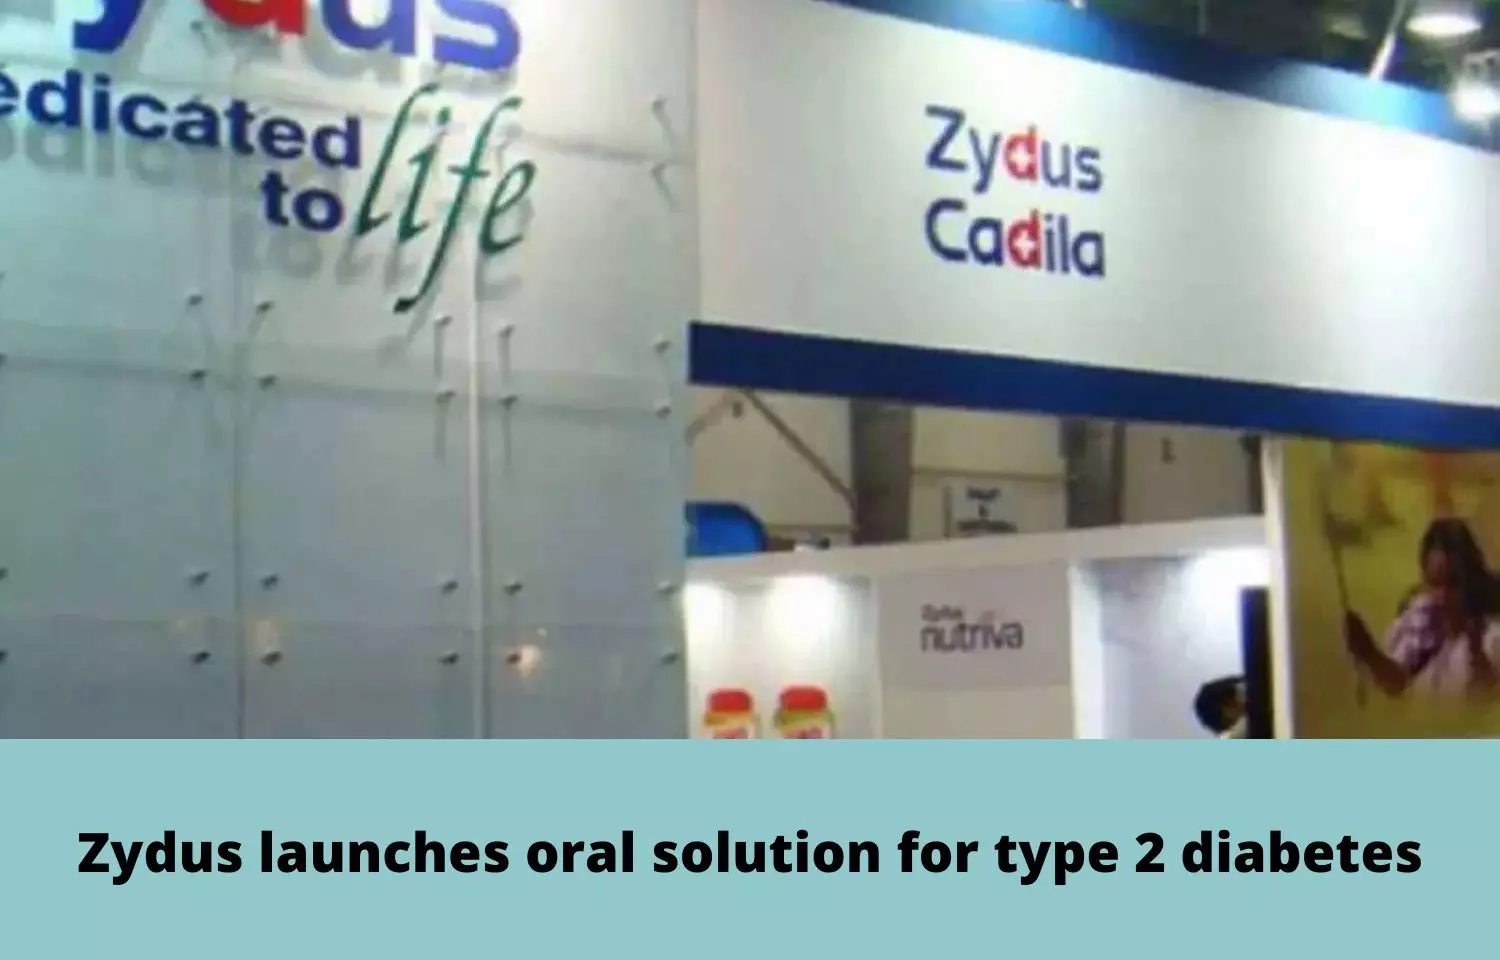 Zydus launches oral solution for type 2 diabetes